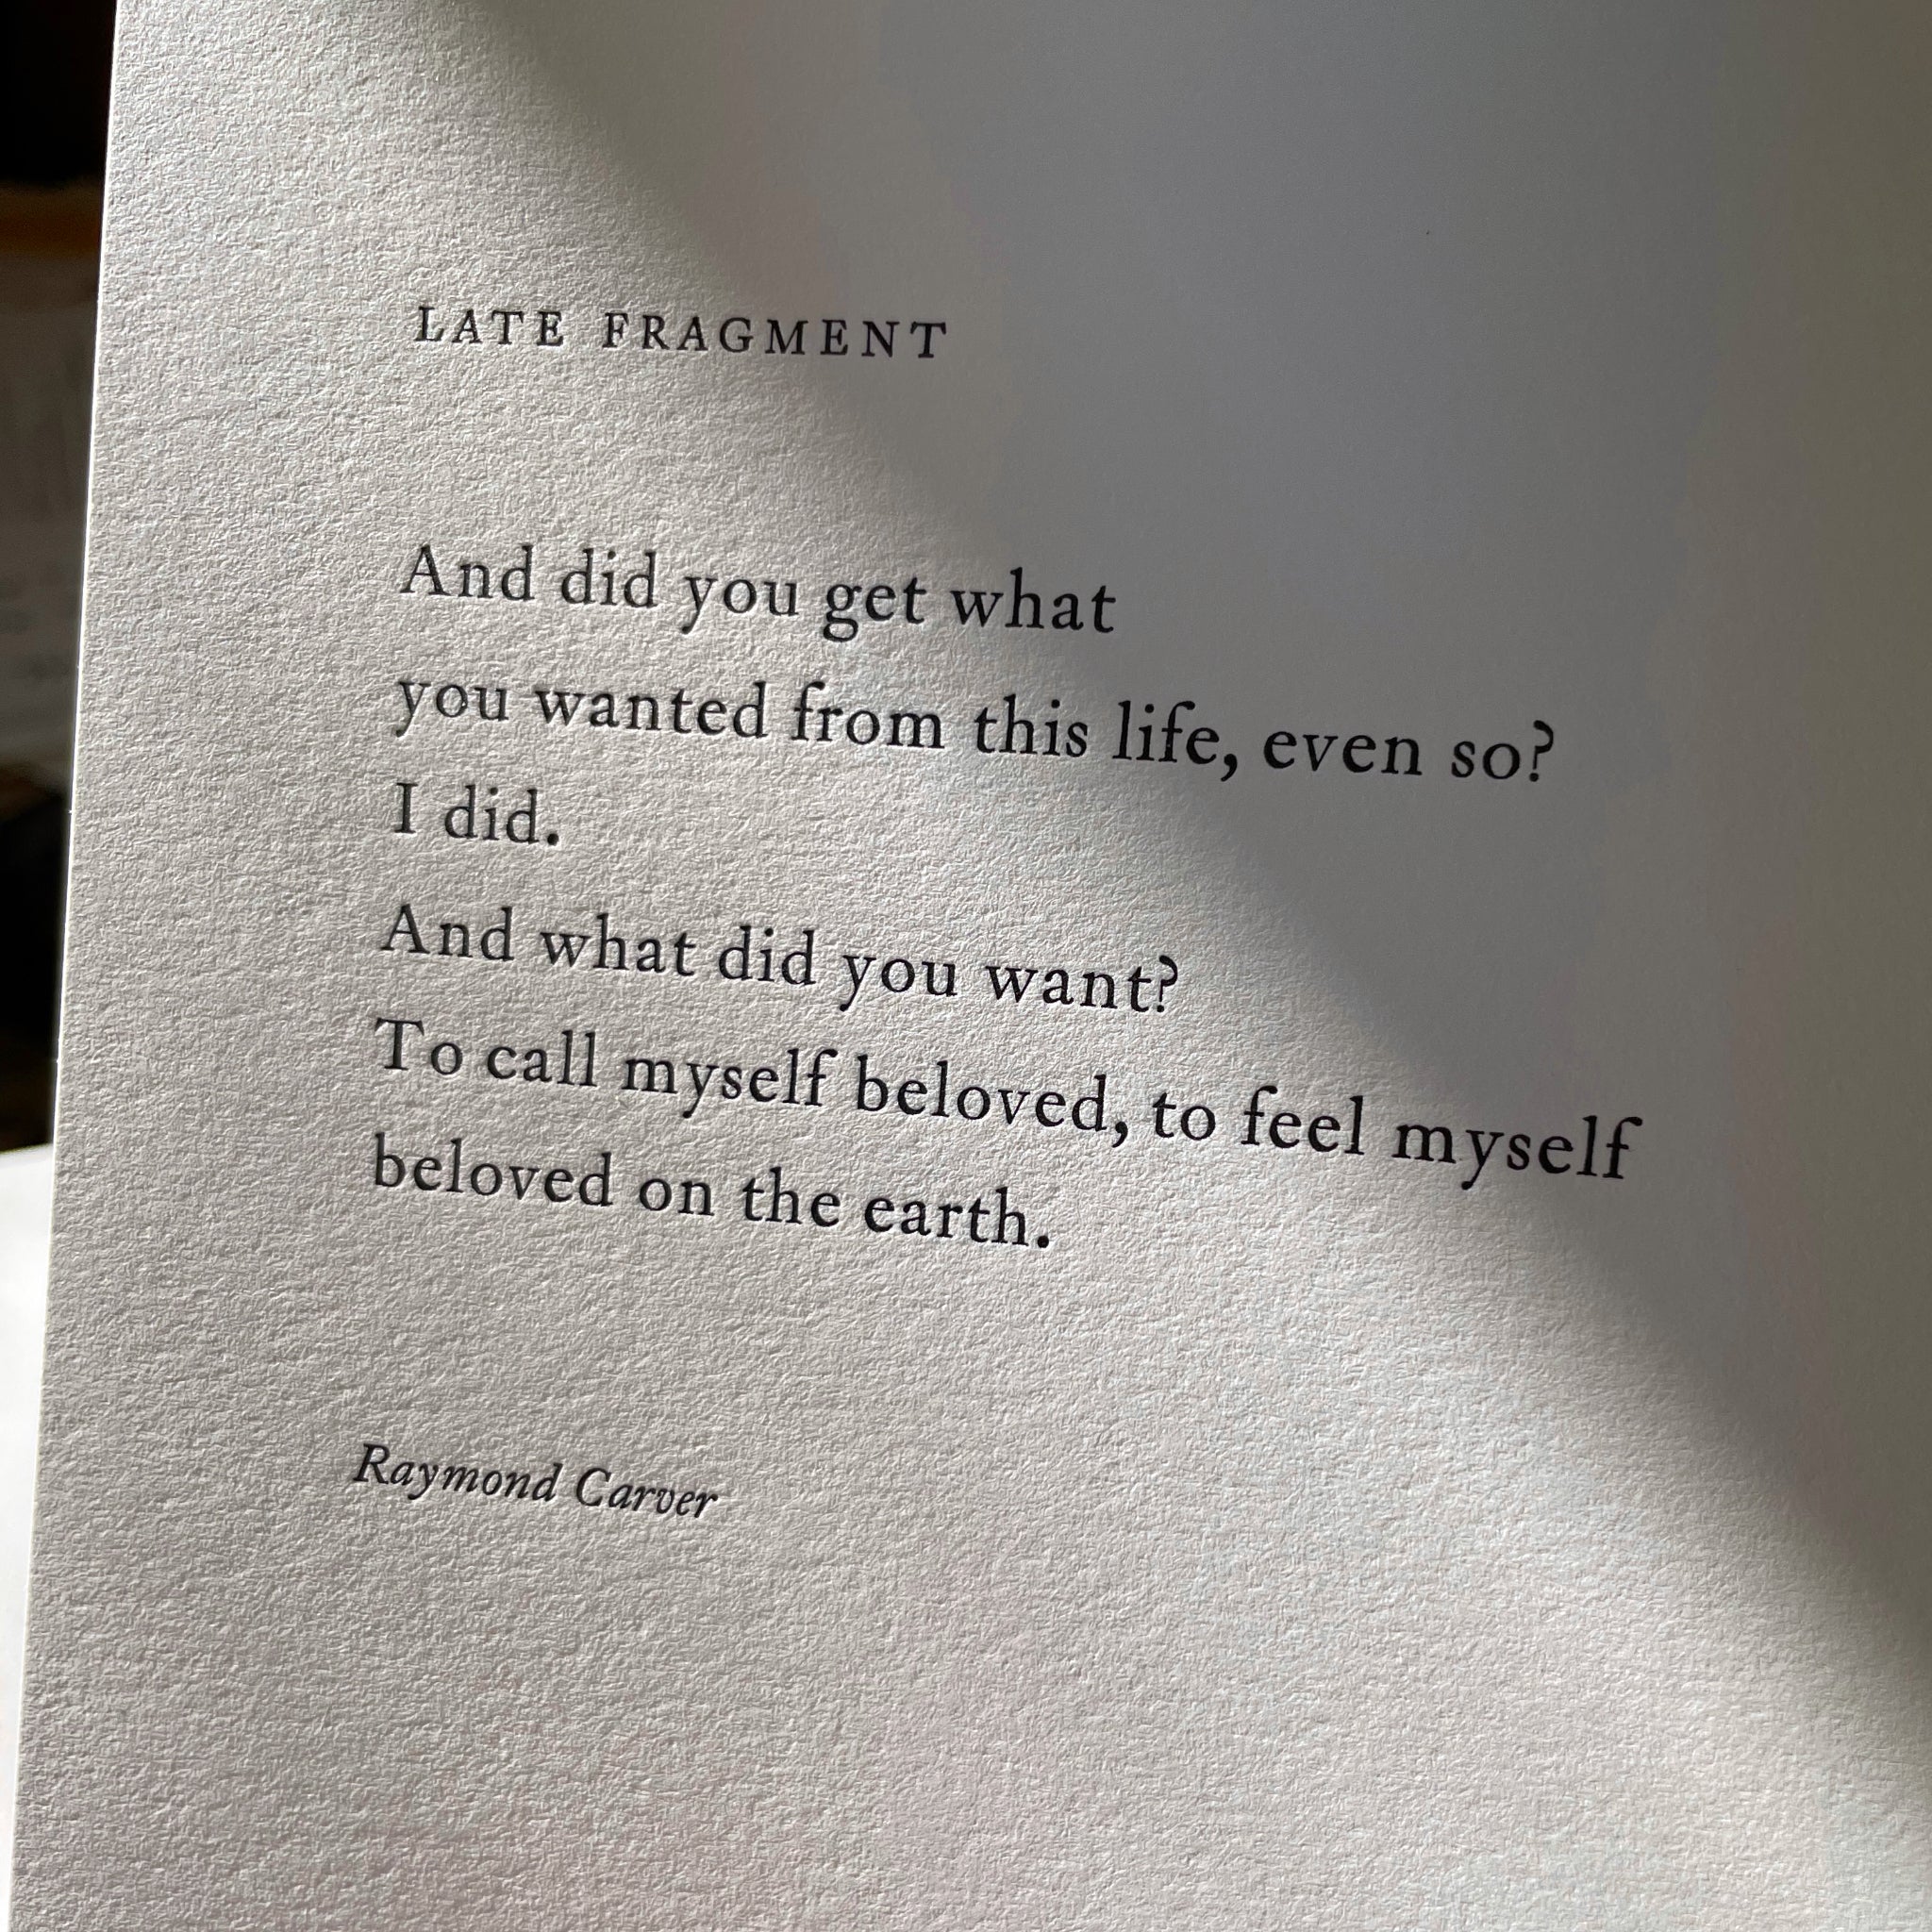 Graveside poetry & pie: Late Fragment by Raymond Carver